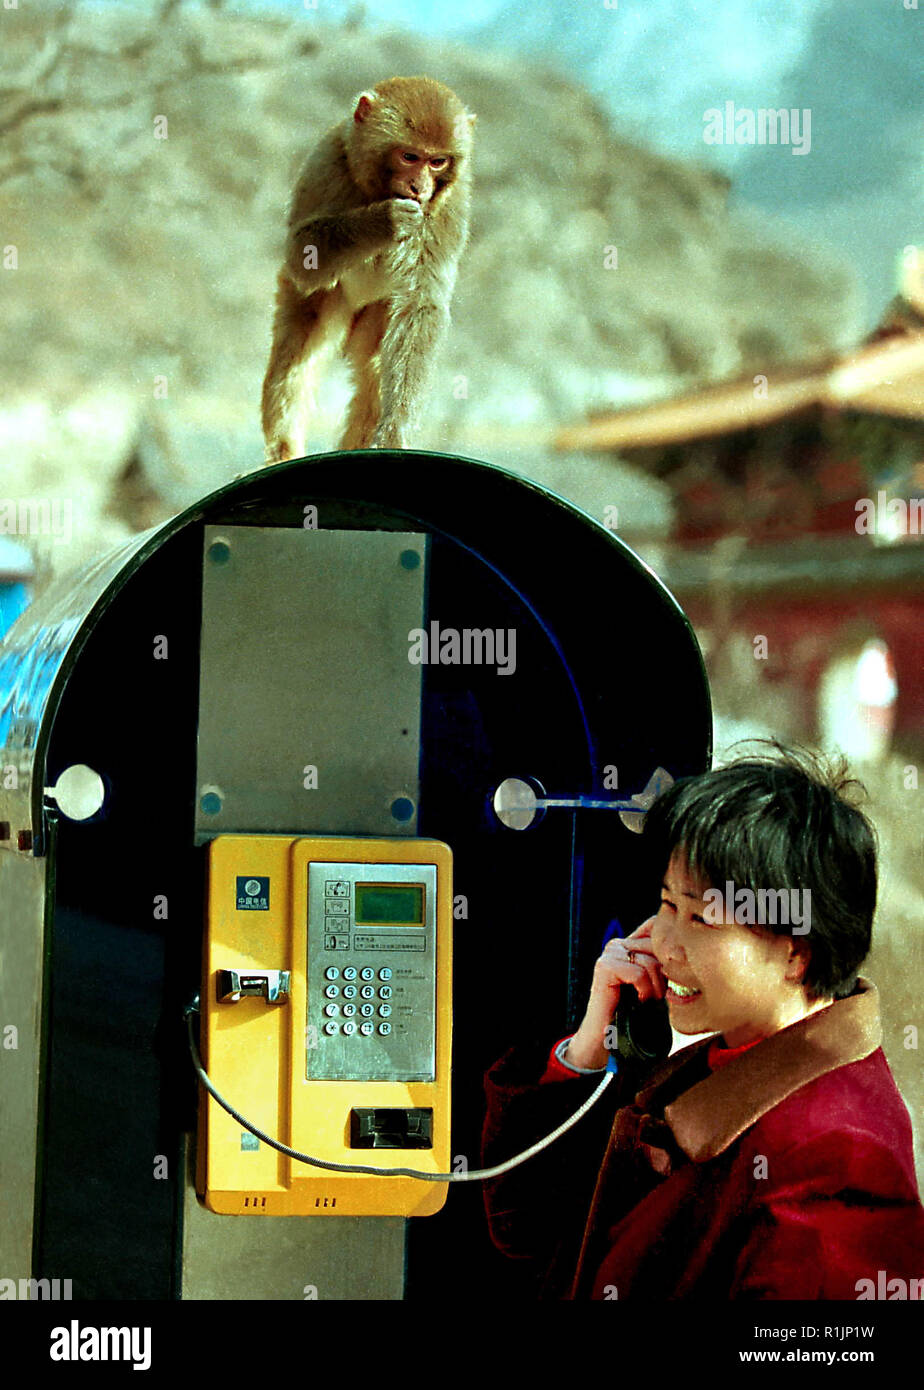 (181113) -- BEIJING, Nov. 13, 2018 (Xinhua) -- A monkey is seen on top of a booth where a tourist makes a phone call at Wulongkou scenic area in Jiyuan, central China's Henan Province, March 16, 2001. More than four decades of sound economic growth from 1978, the starting year of the reform and opening-up policy, has fundamentally lifted life quality of 1.3 billion Chinese, who are now able to enjoy the 'global village' thanks to the advanced telecom infrastructure. However, Chinese people also ever went through the time when writing letters was the most frequent means to contact with faraway Stock Photo